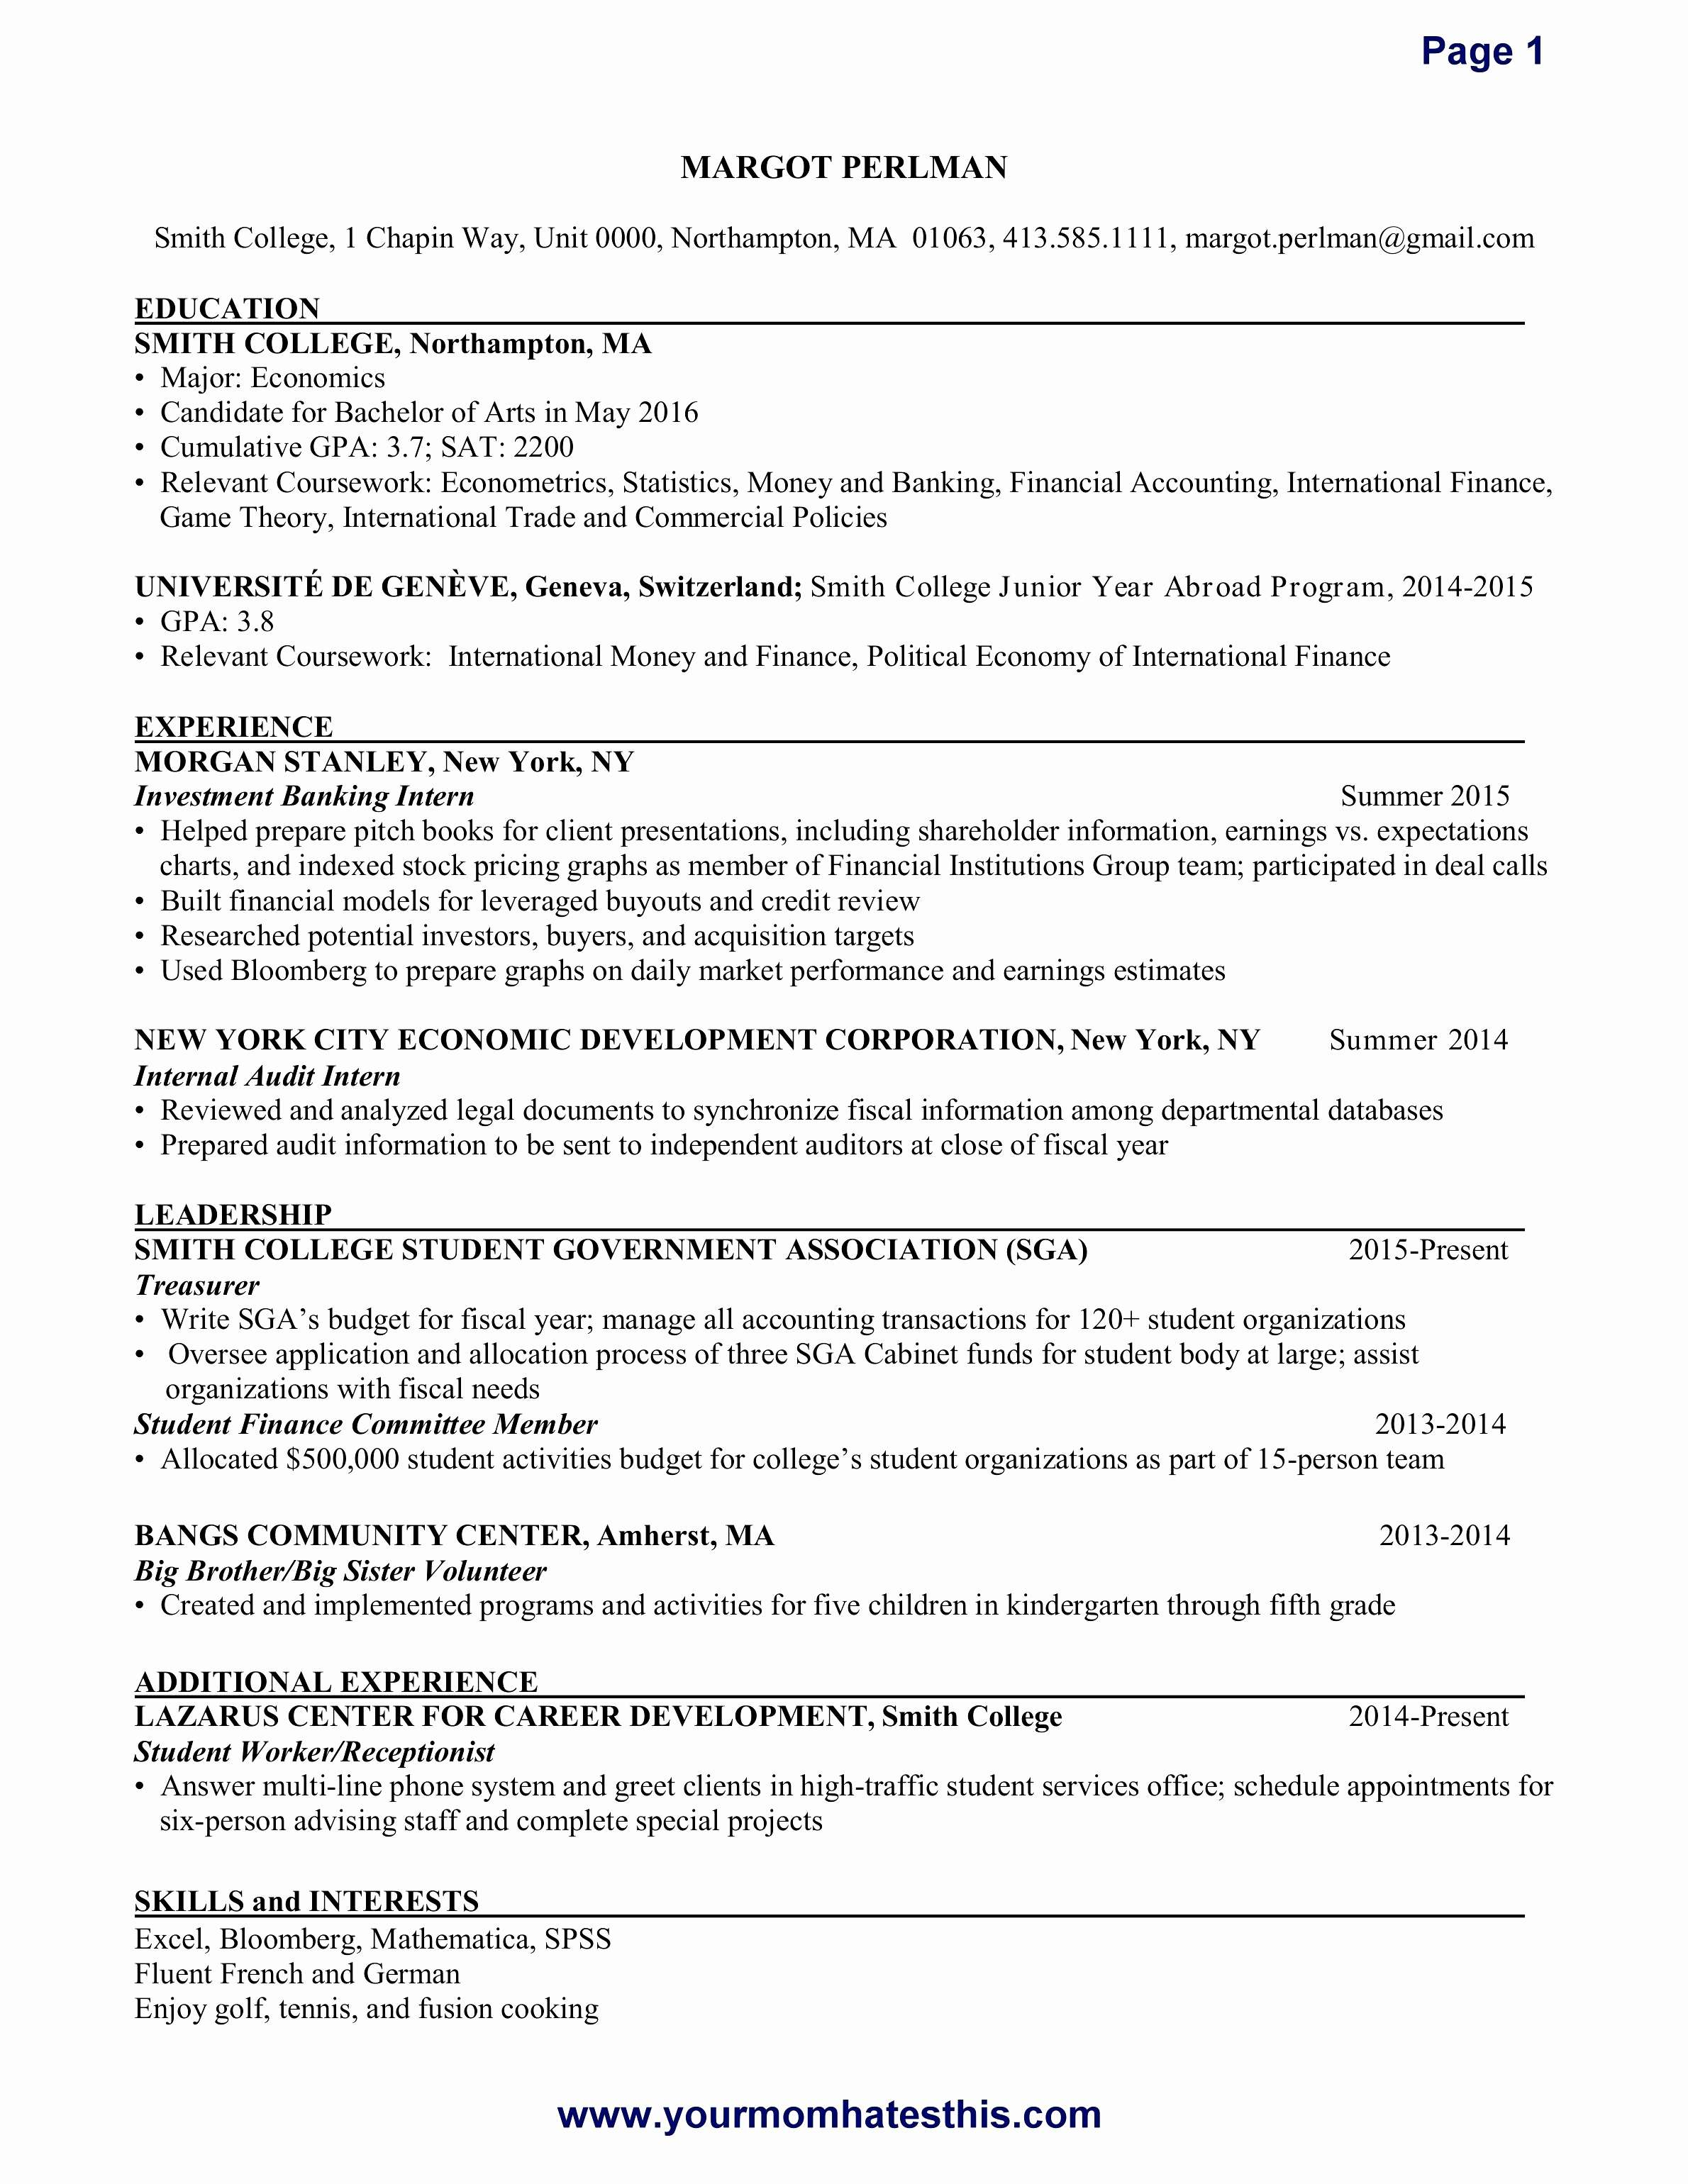 Loan Letter Template - Loan Ficer Resume Fresh Cover Letter with Resume New Template